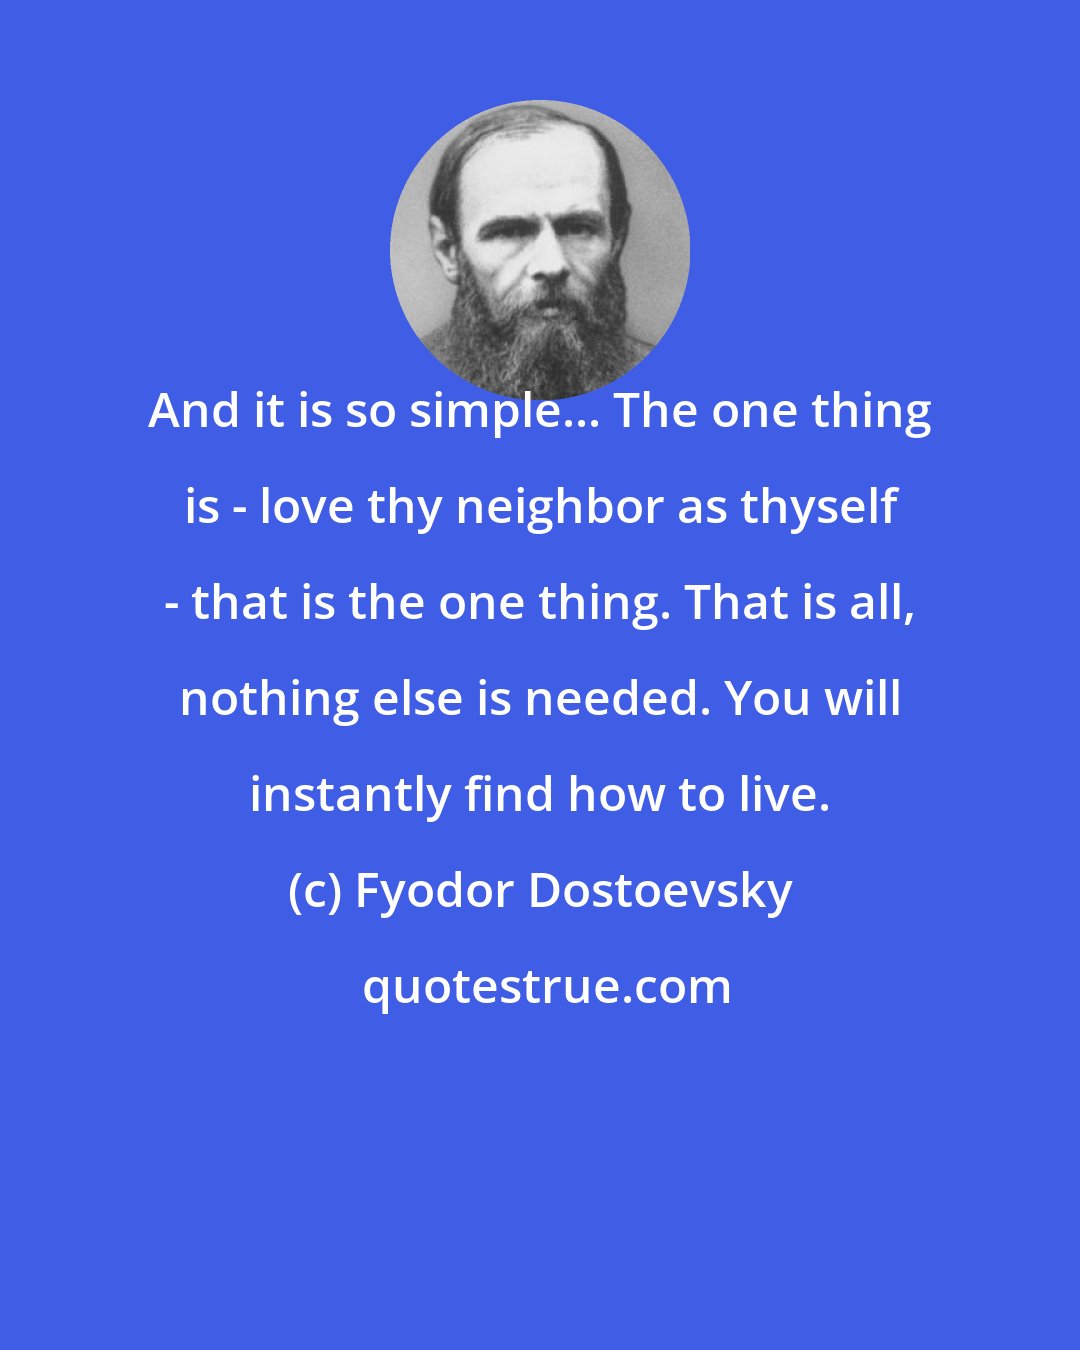 Fyodor Dostoevsky: And it is so simple... The one thing is - love thy neighbor as thyself - that is the one thing. That is all, nothing else is needed. You will instantly find how to live.